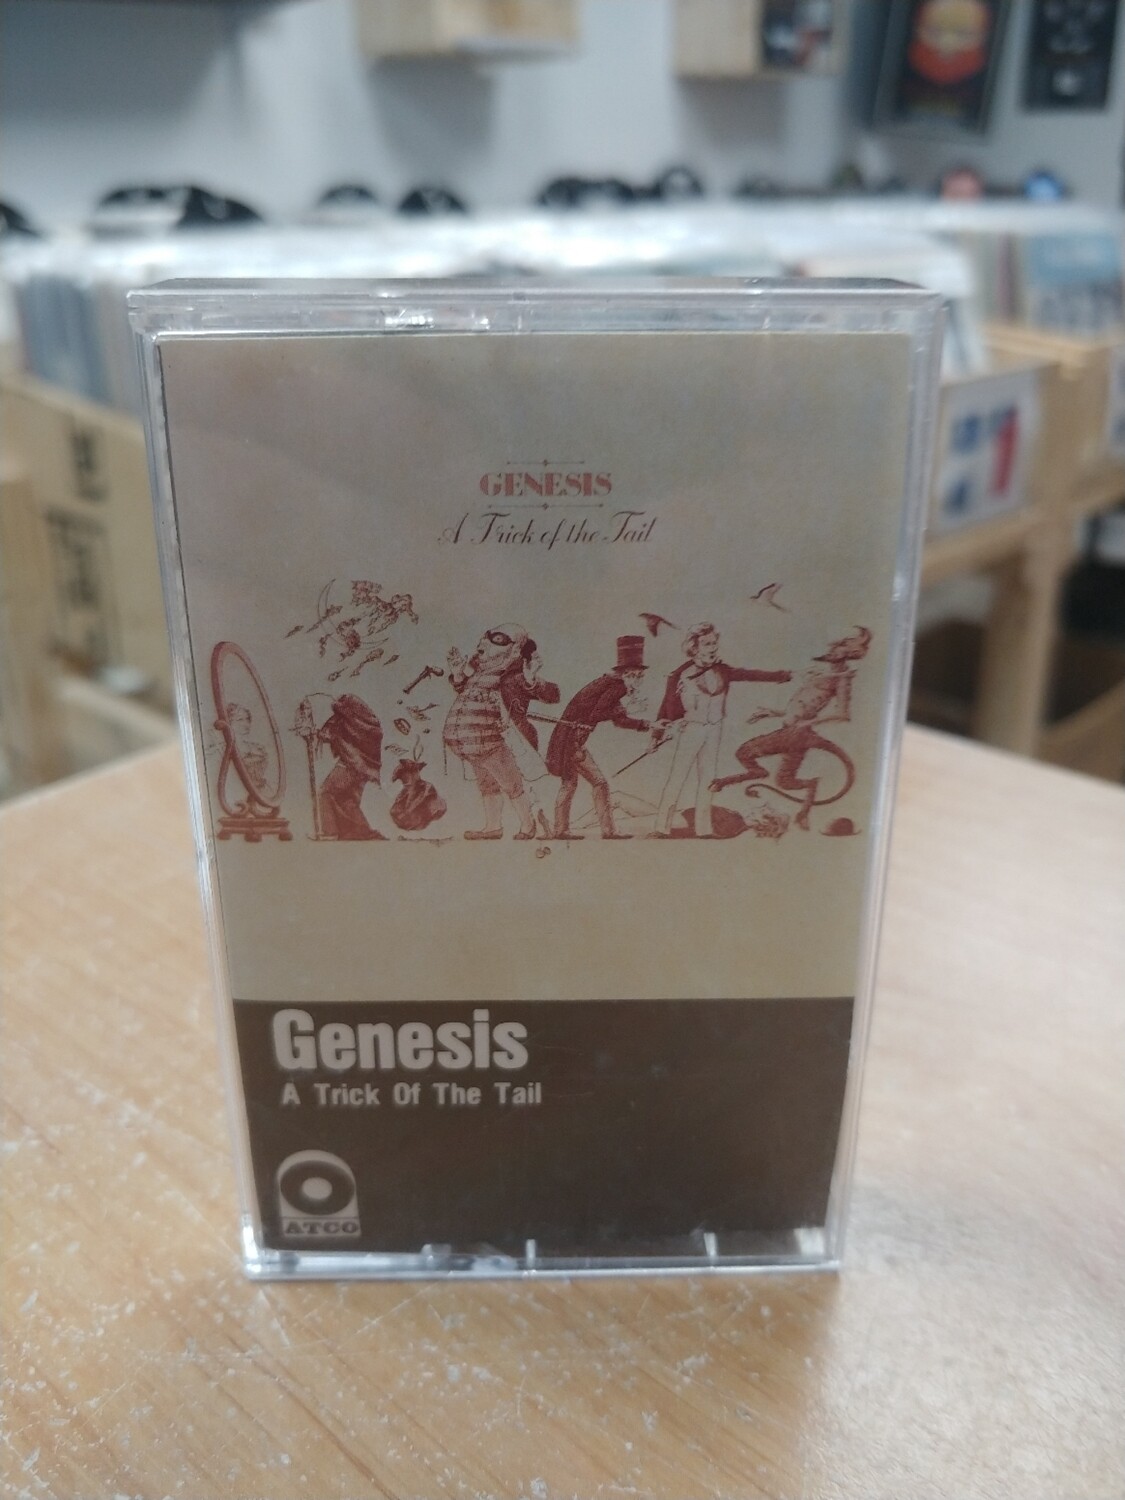 Genesis - A trick of the tail (CASSETTE)